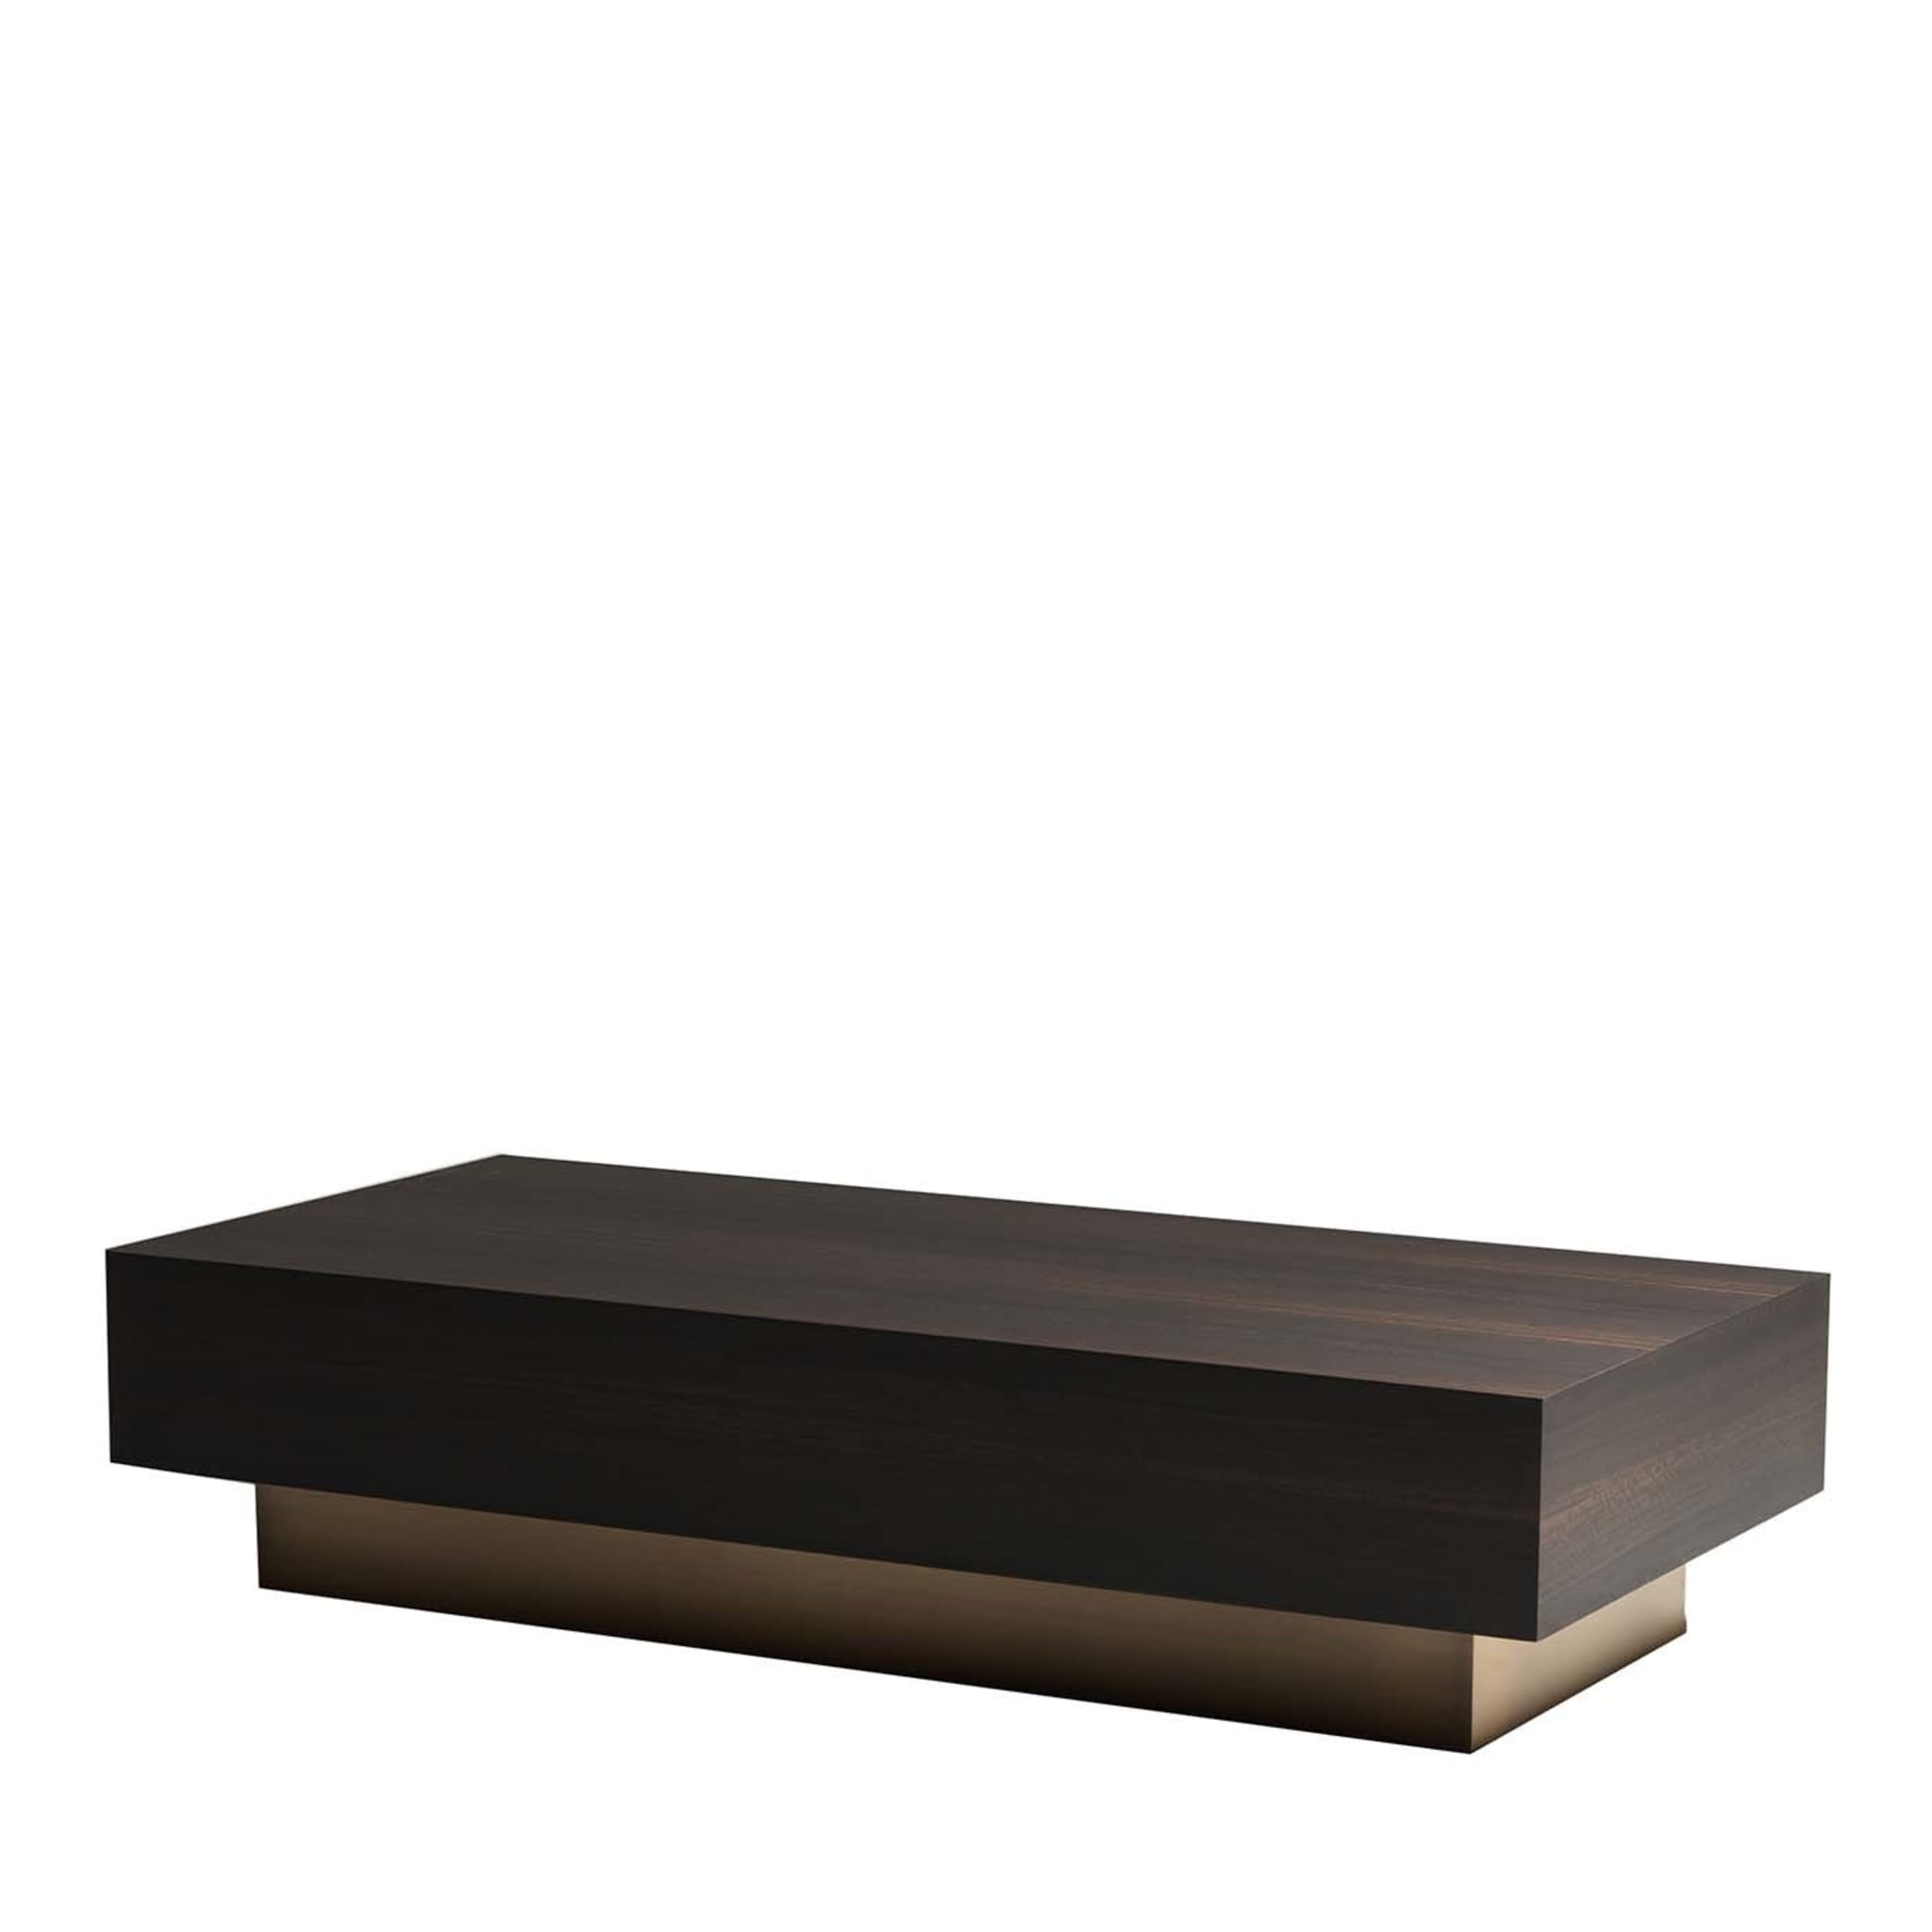 Cubo coffee table by Marco and Giulio Mantellassi - Main view